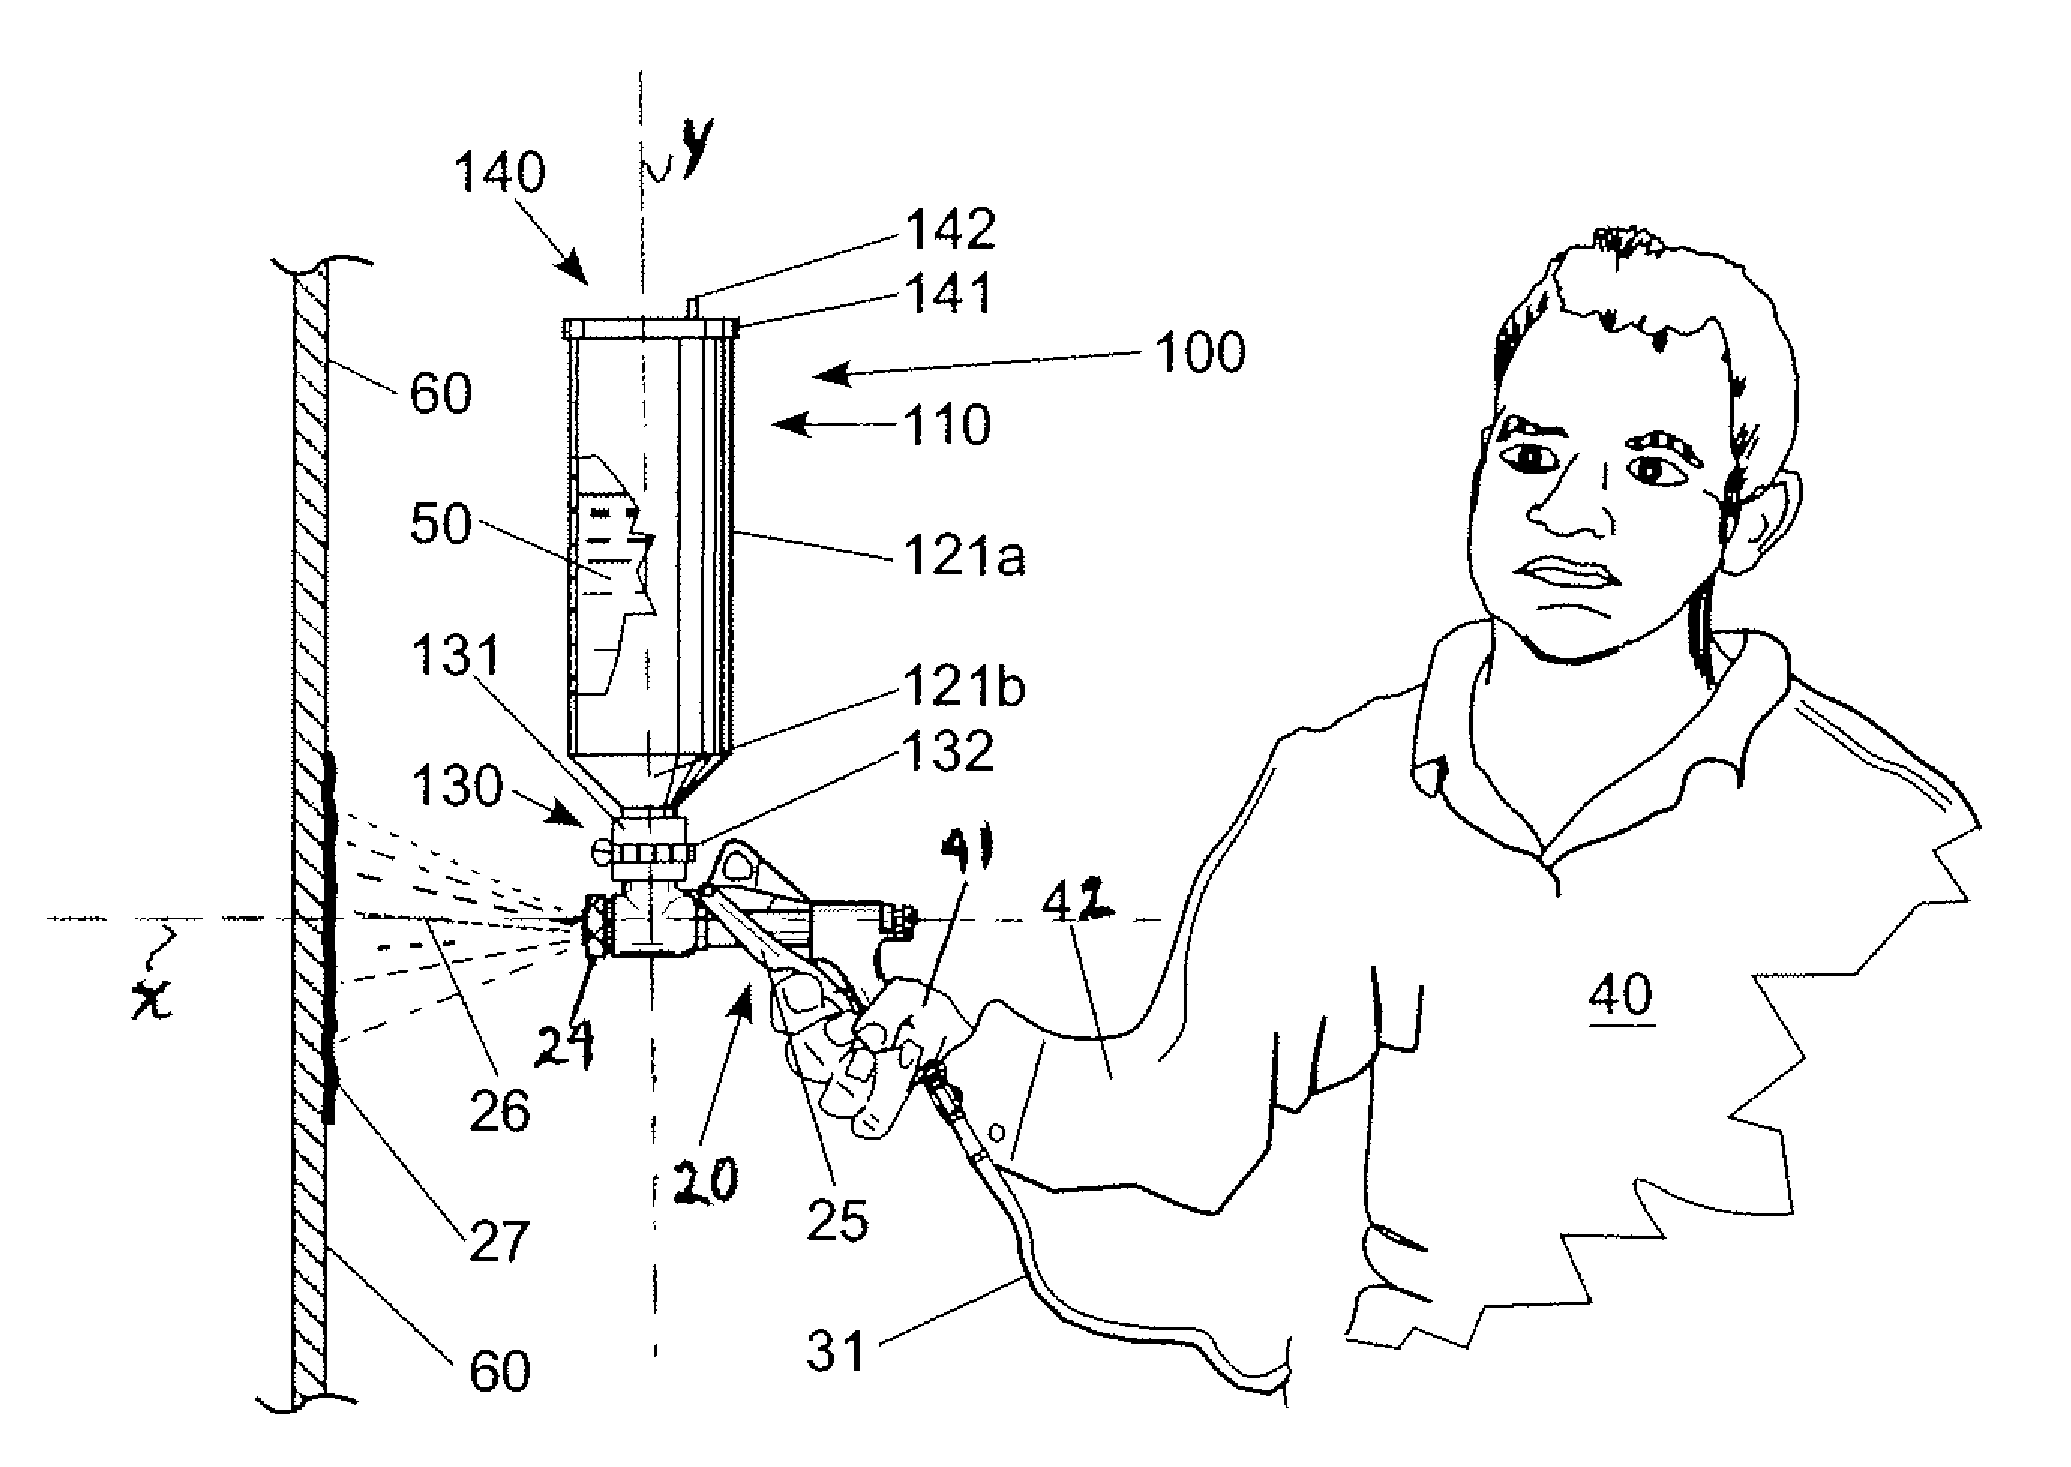 Hopper-type texture spray apparatus and hopper assembly therefor